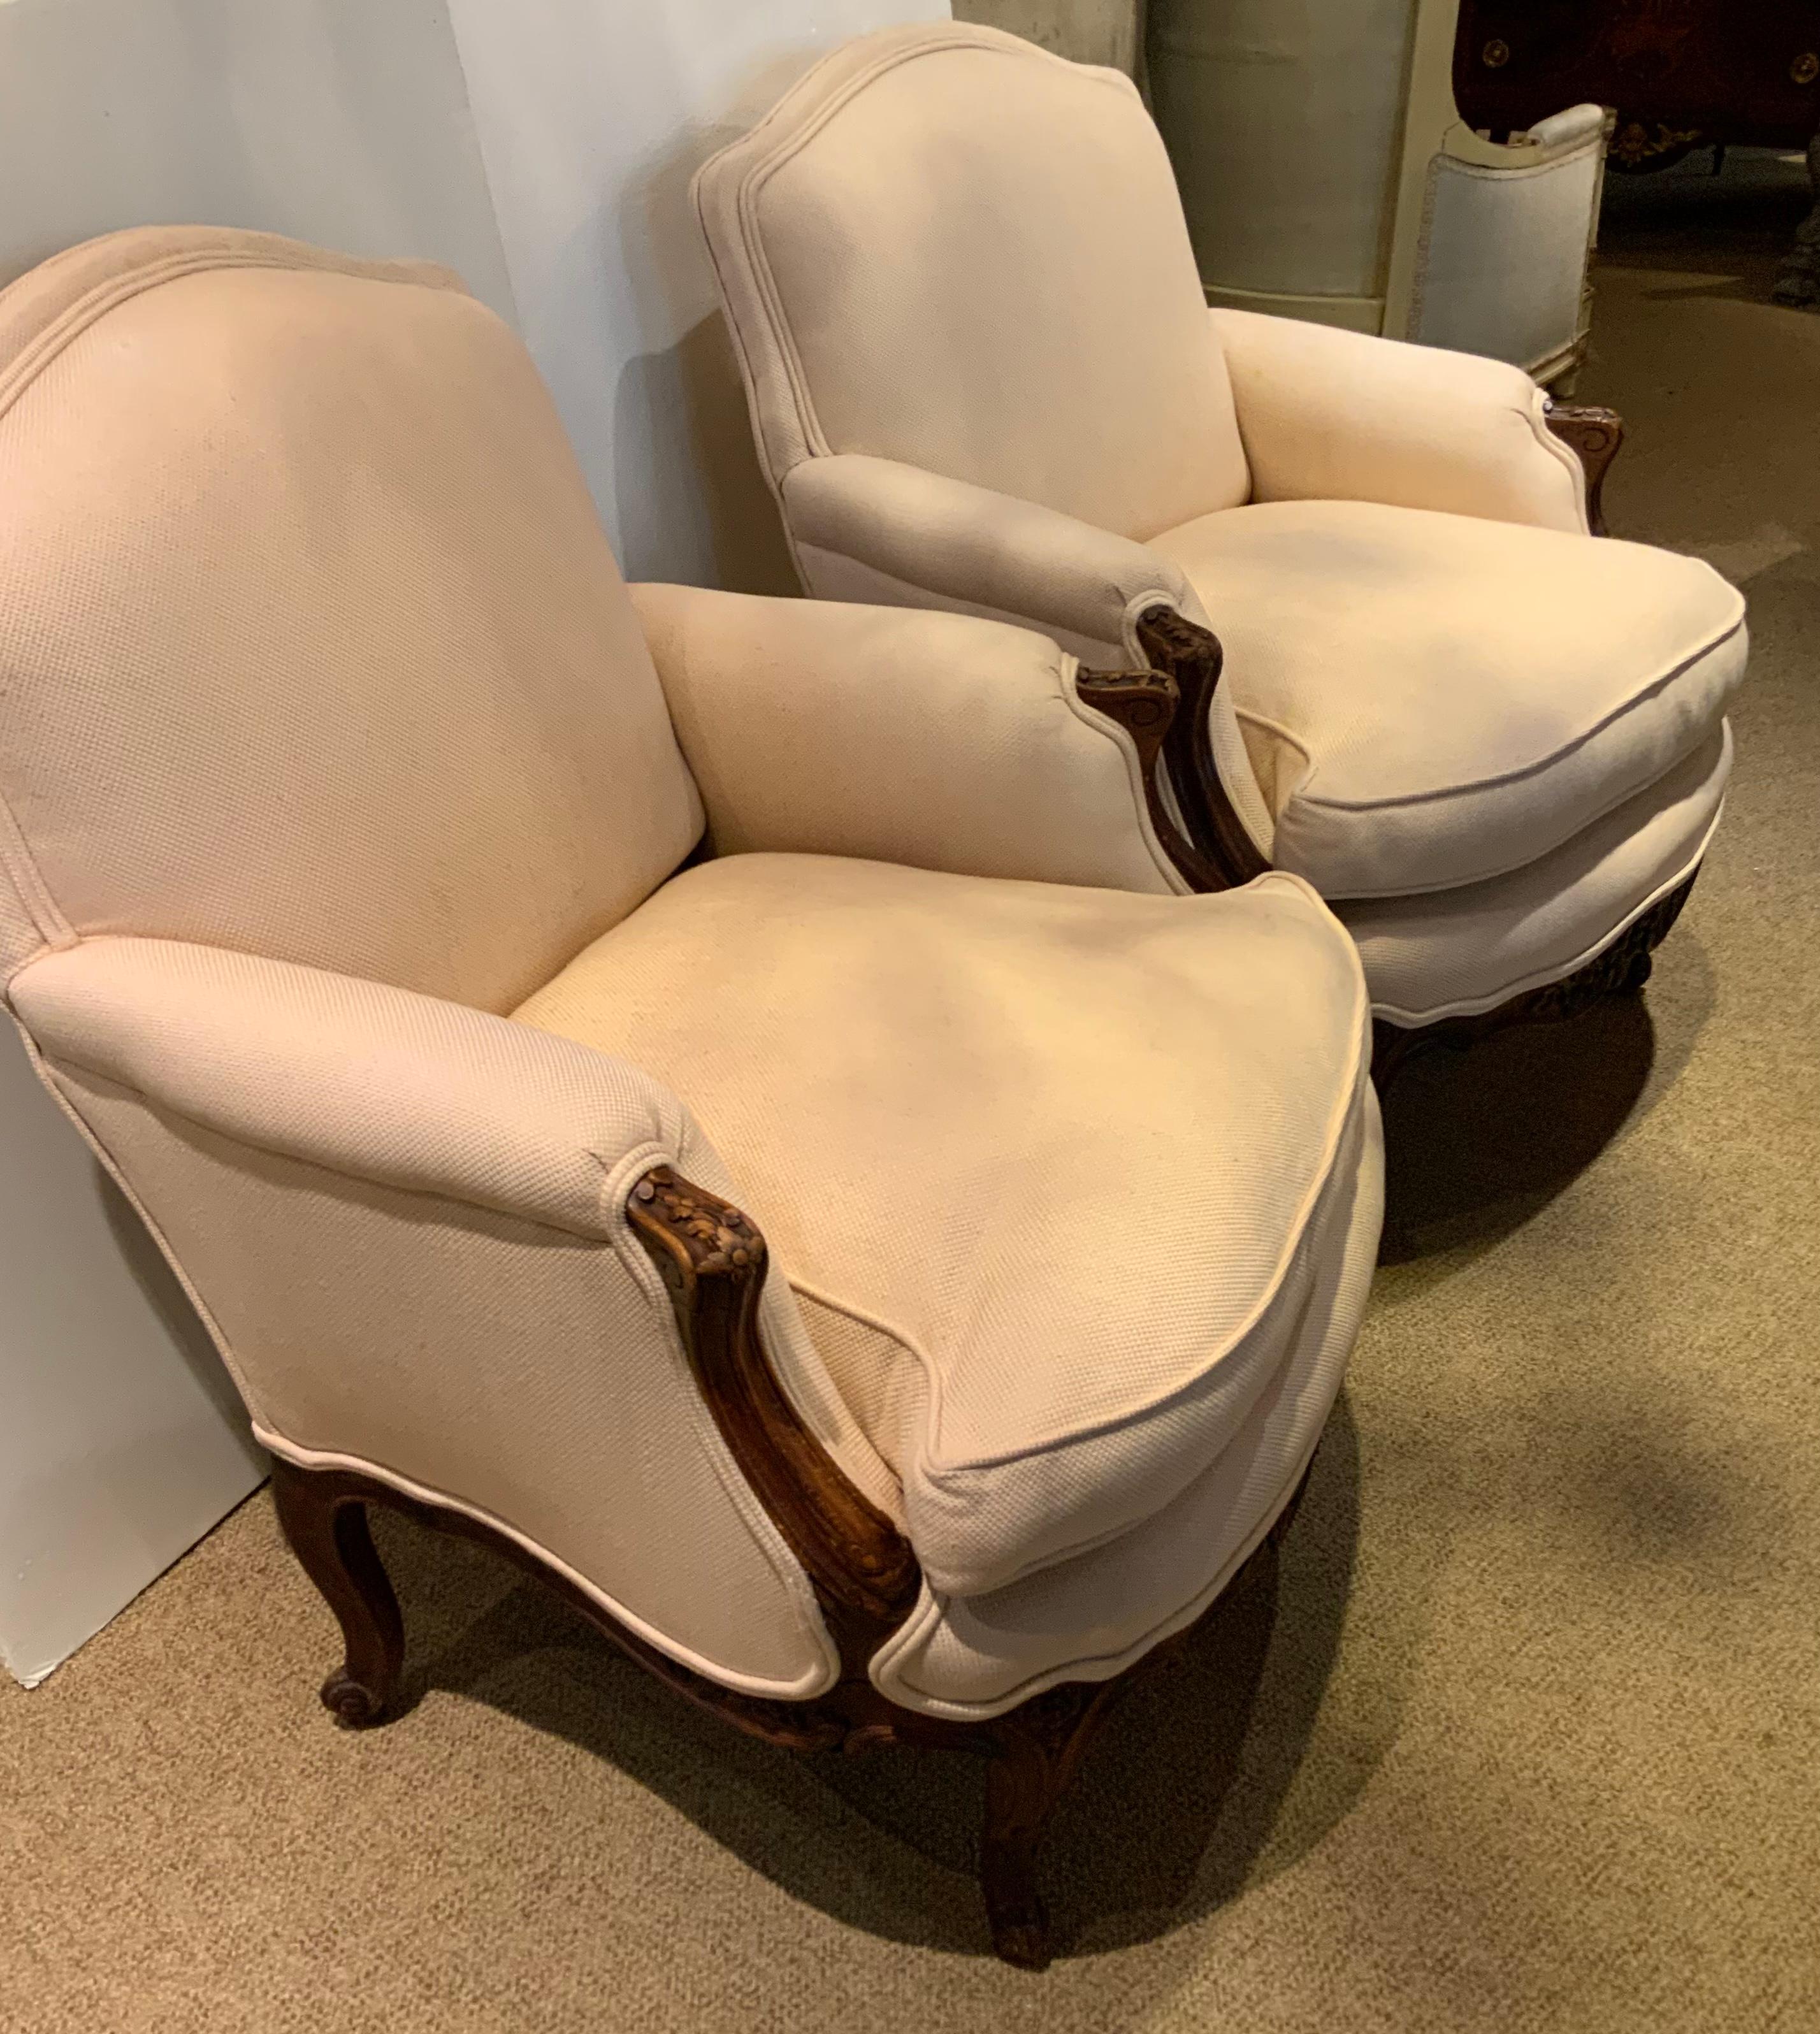 This pair of Louis XV-Style chairs are both beautiful and extremely comfortable 
With a lovely cream colored fabric, they are well padded and have great
Support for the back. The frame is made in a medium colored walnut
And has hand carved floral